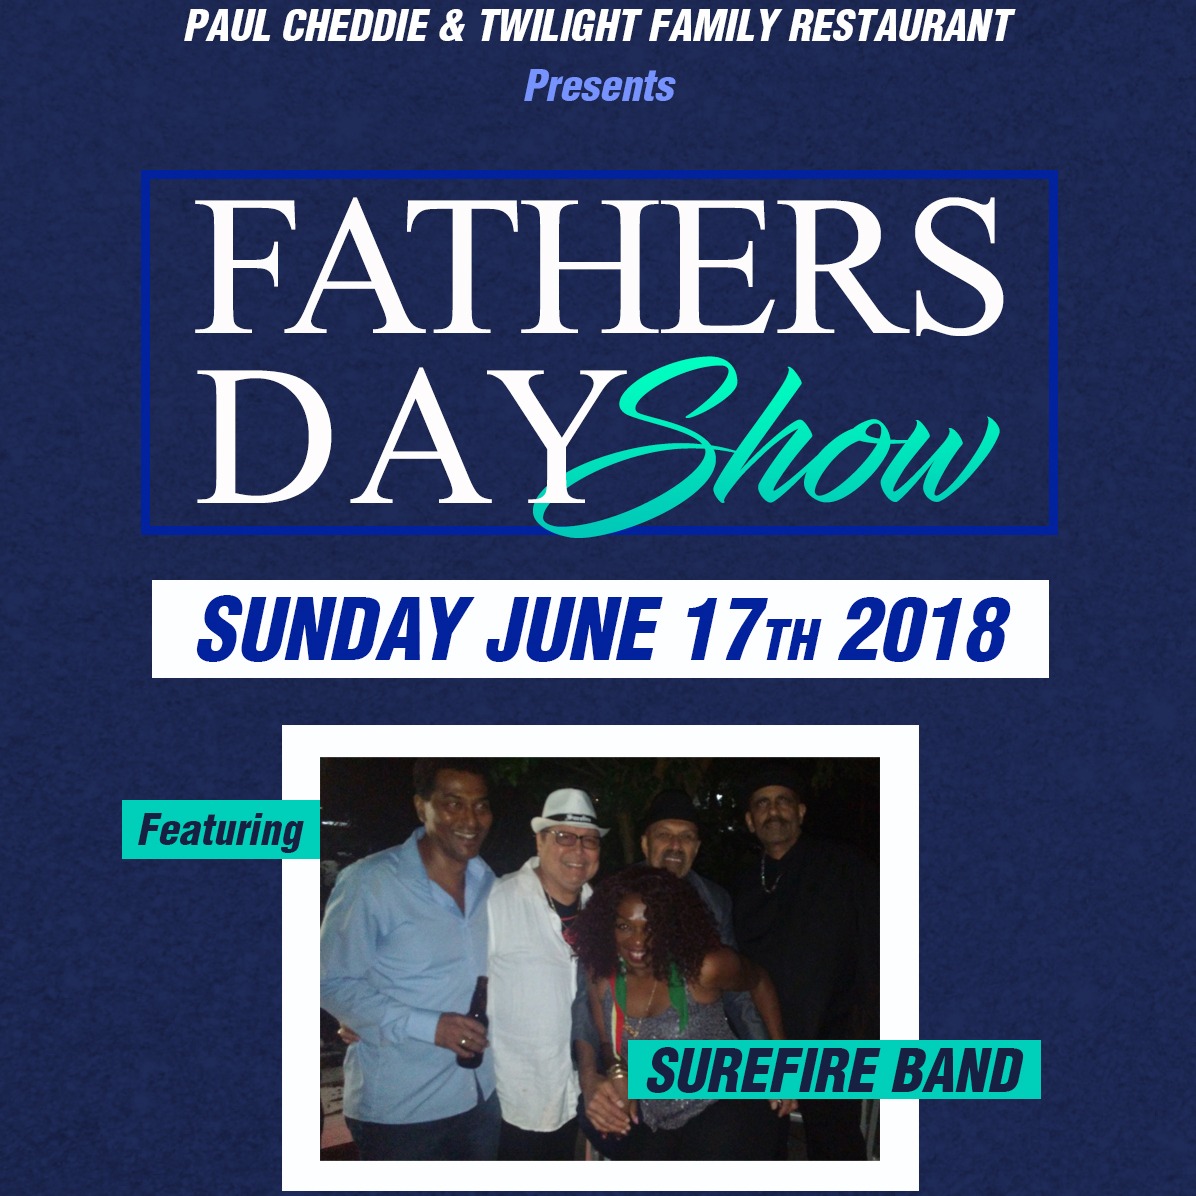 Fathers Day Show